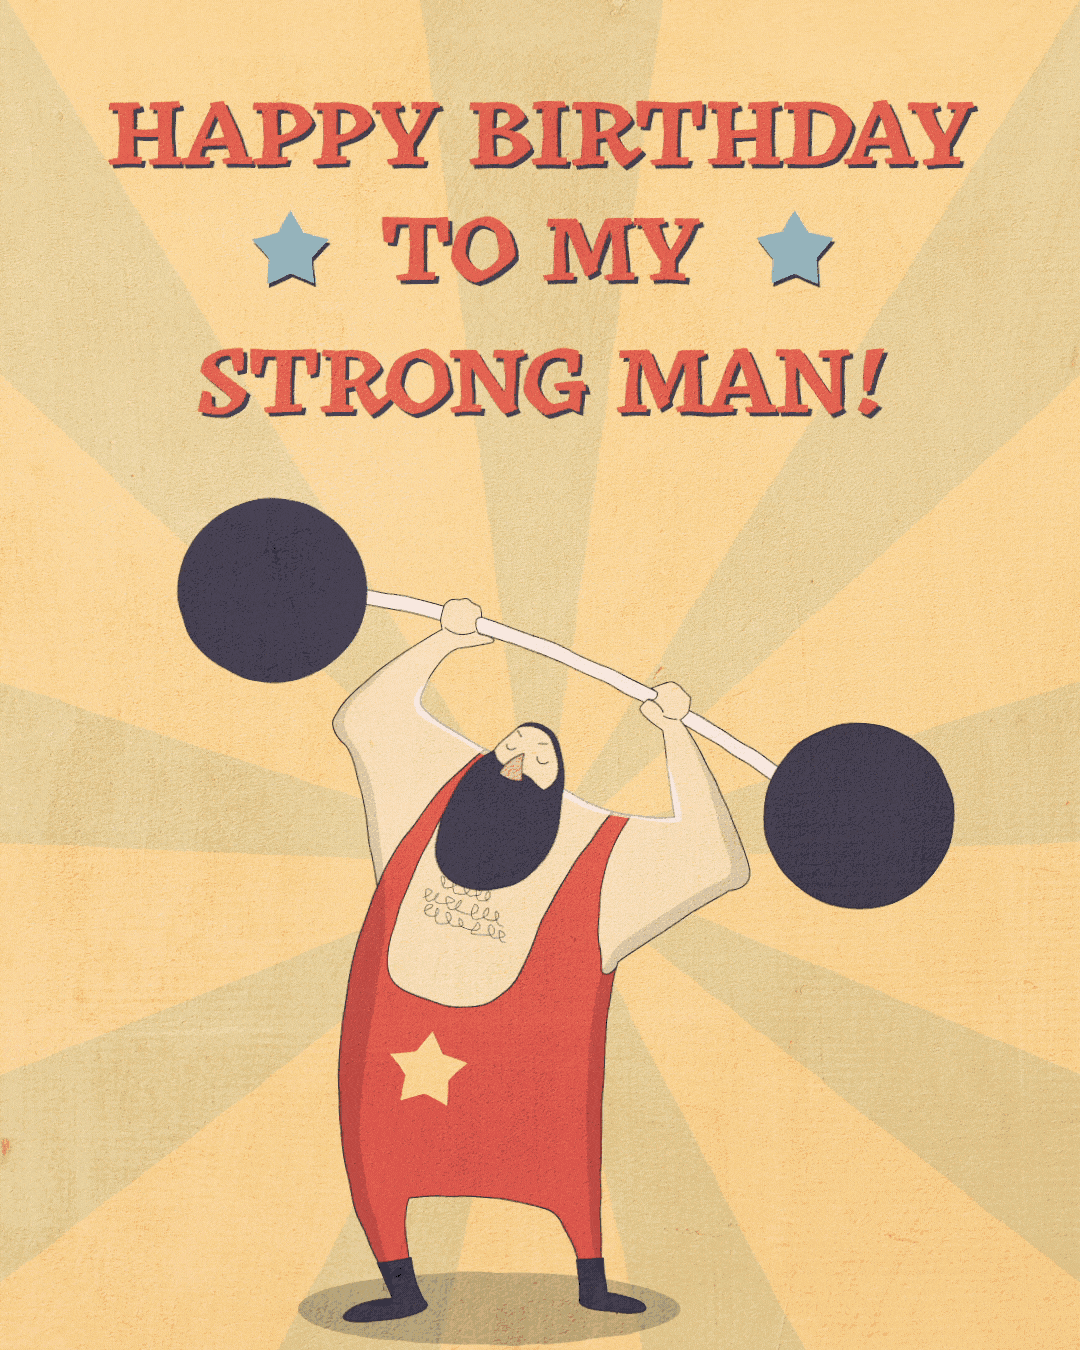 Free Happy Birthday Animated Images and GIFs for Husband ...